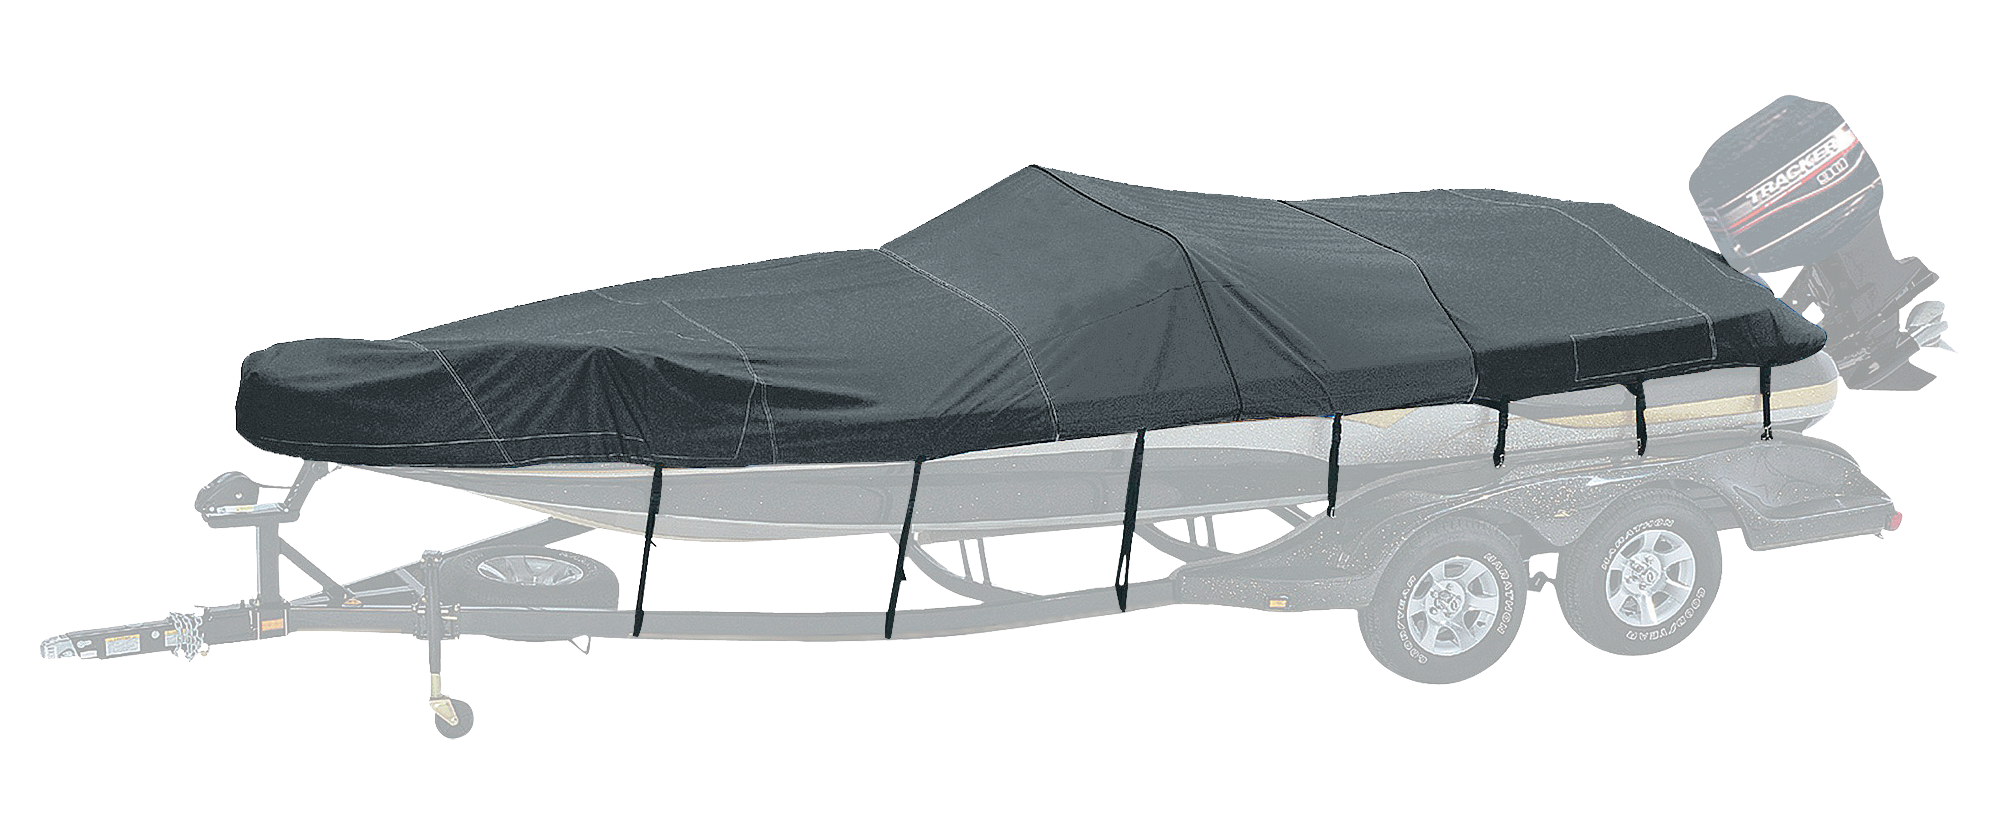 Bass Pro Shops Exact Fit Custom Boat Cover by Westland - Tracker Boats - 2002-2005 Panfish 16 SC - Charcoal